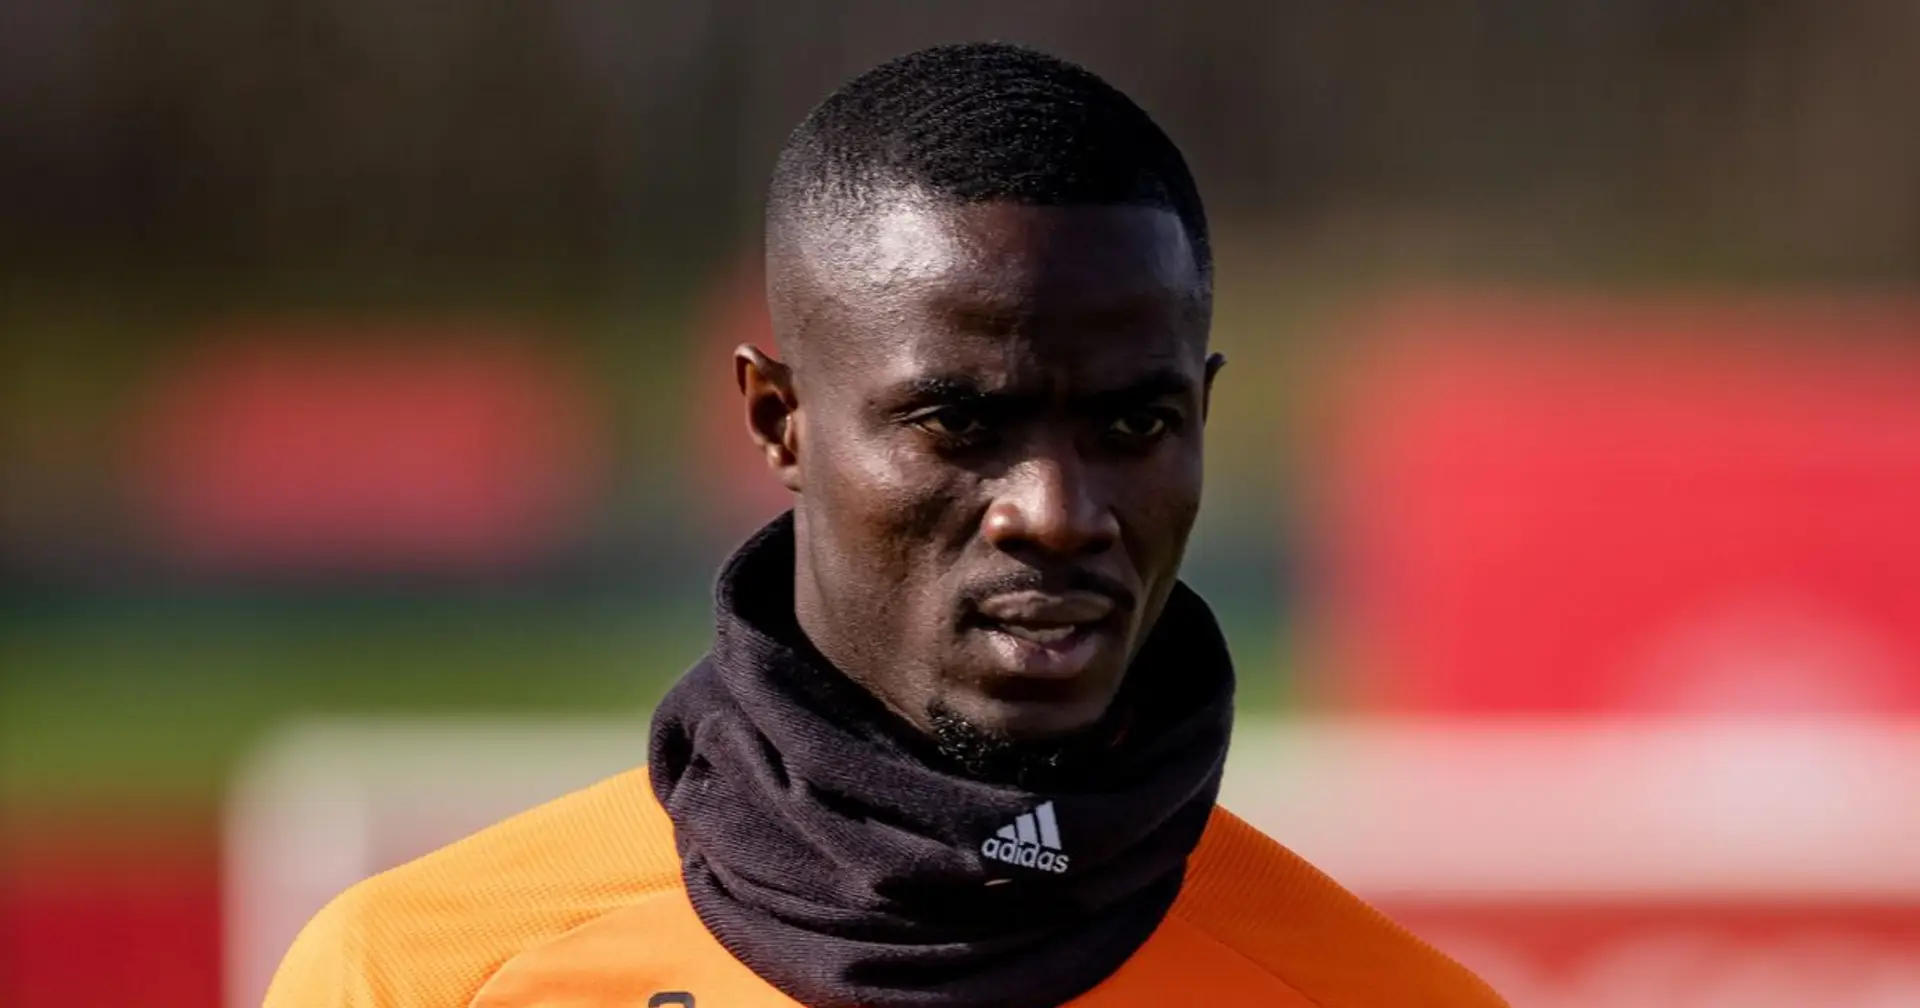 Solskjaer confirms Eric Bailly has tested positive for Covid-19